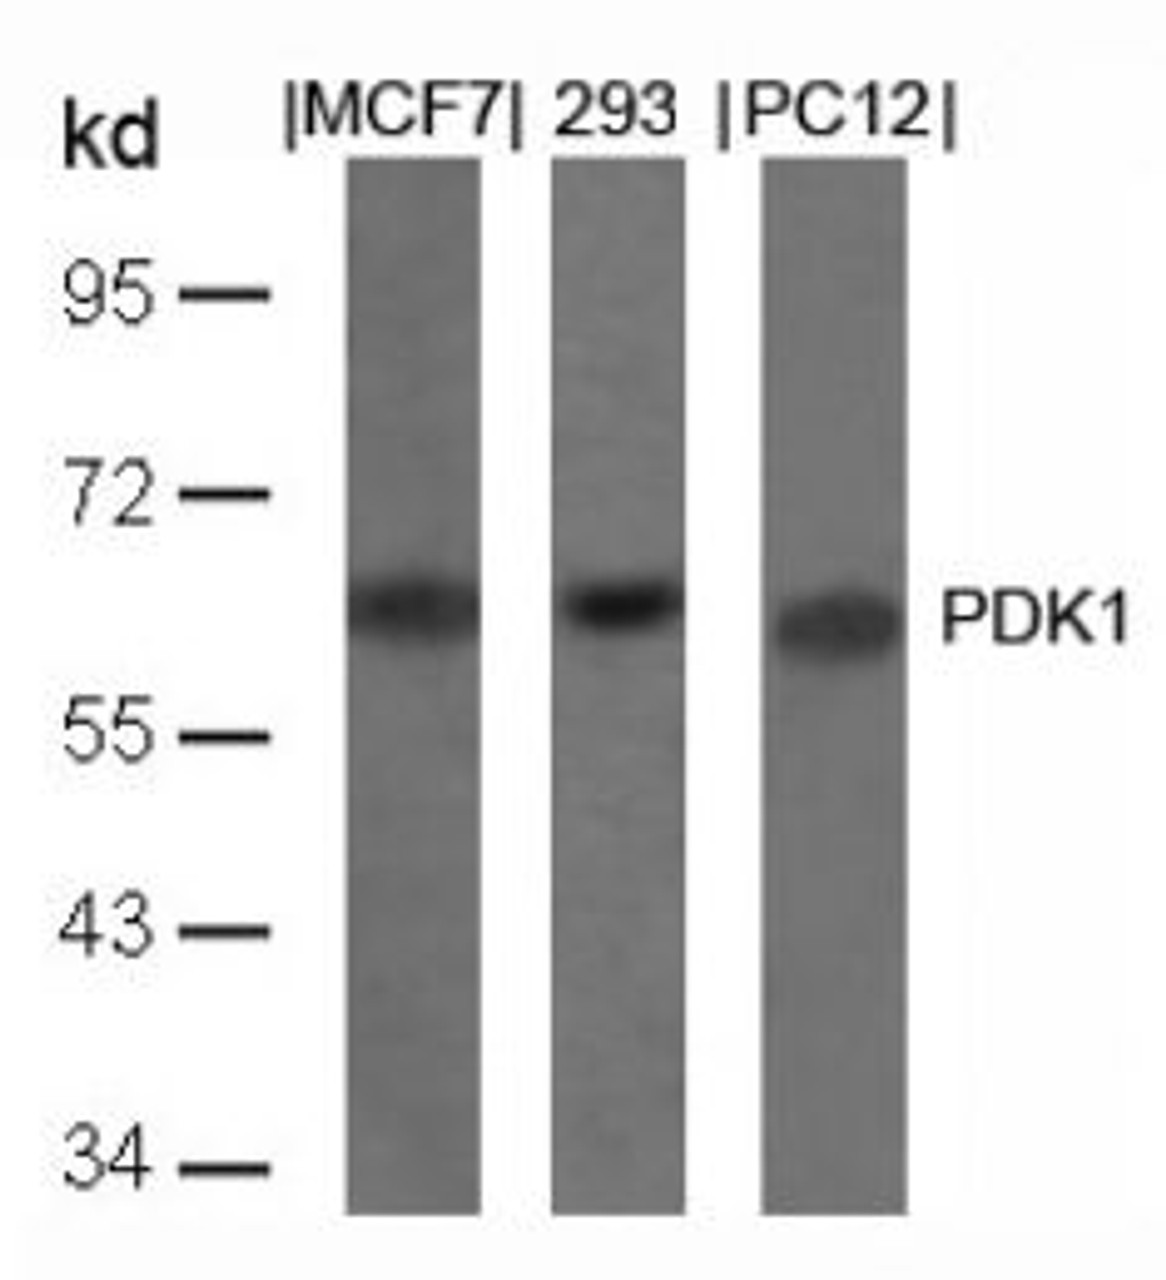 Western blot analysis of lysed extracts from MCF, 293 and PC12 cells using PDK1 (Ab-241) .